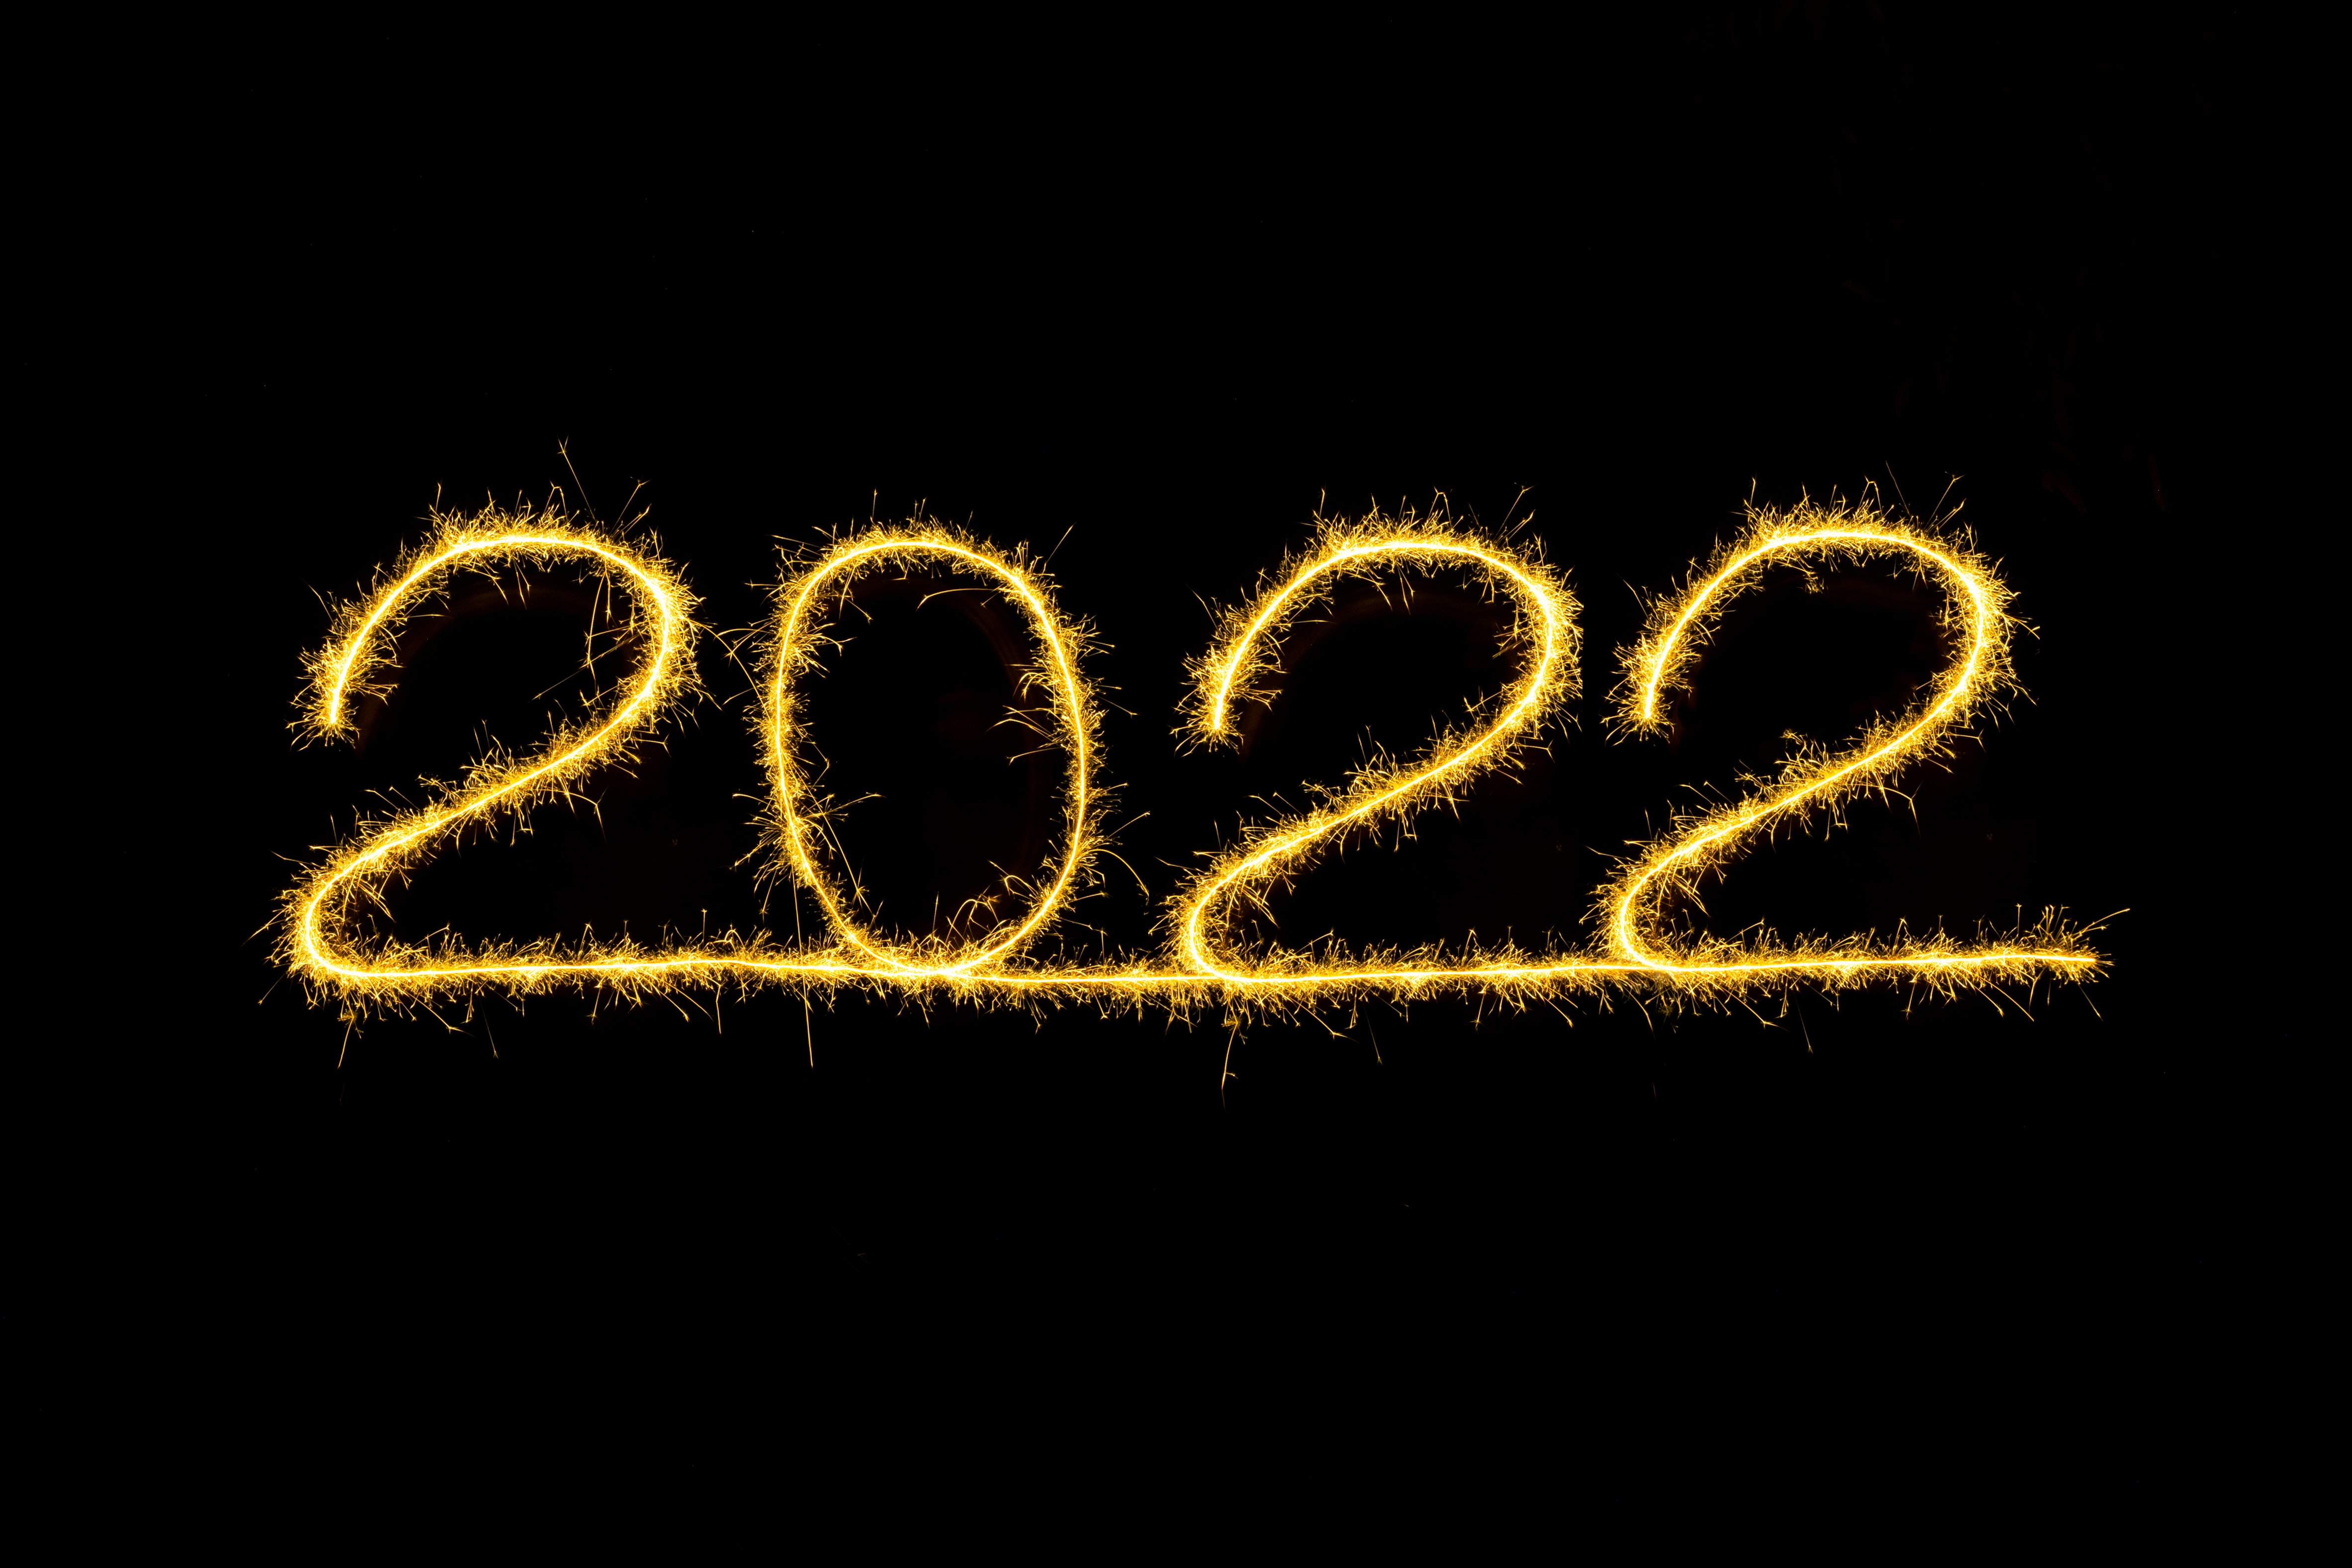 2022 Predictions by Avalon CX